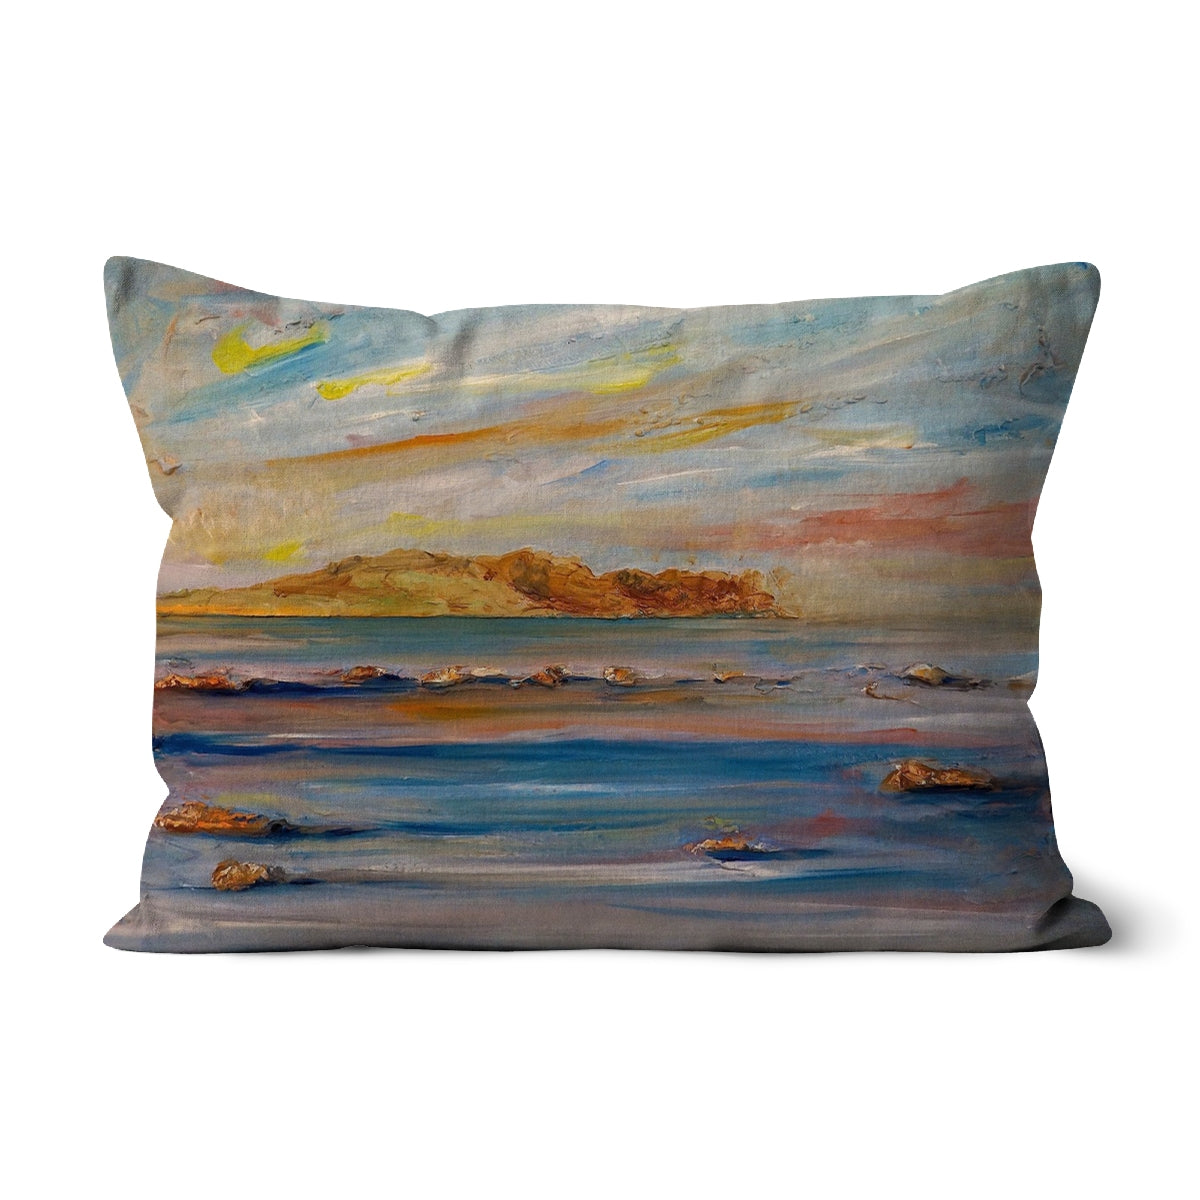 Tiree Dawn Art Gifts Cushion-Cushions-Hebridean Islands Art Gallery-Canvas-19"x13"-Paintings, Prints, Homeware, Art Gifts From Scotland By Scottish Artist Kevin Hunter